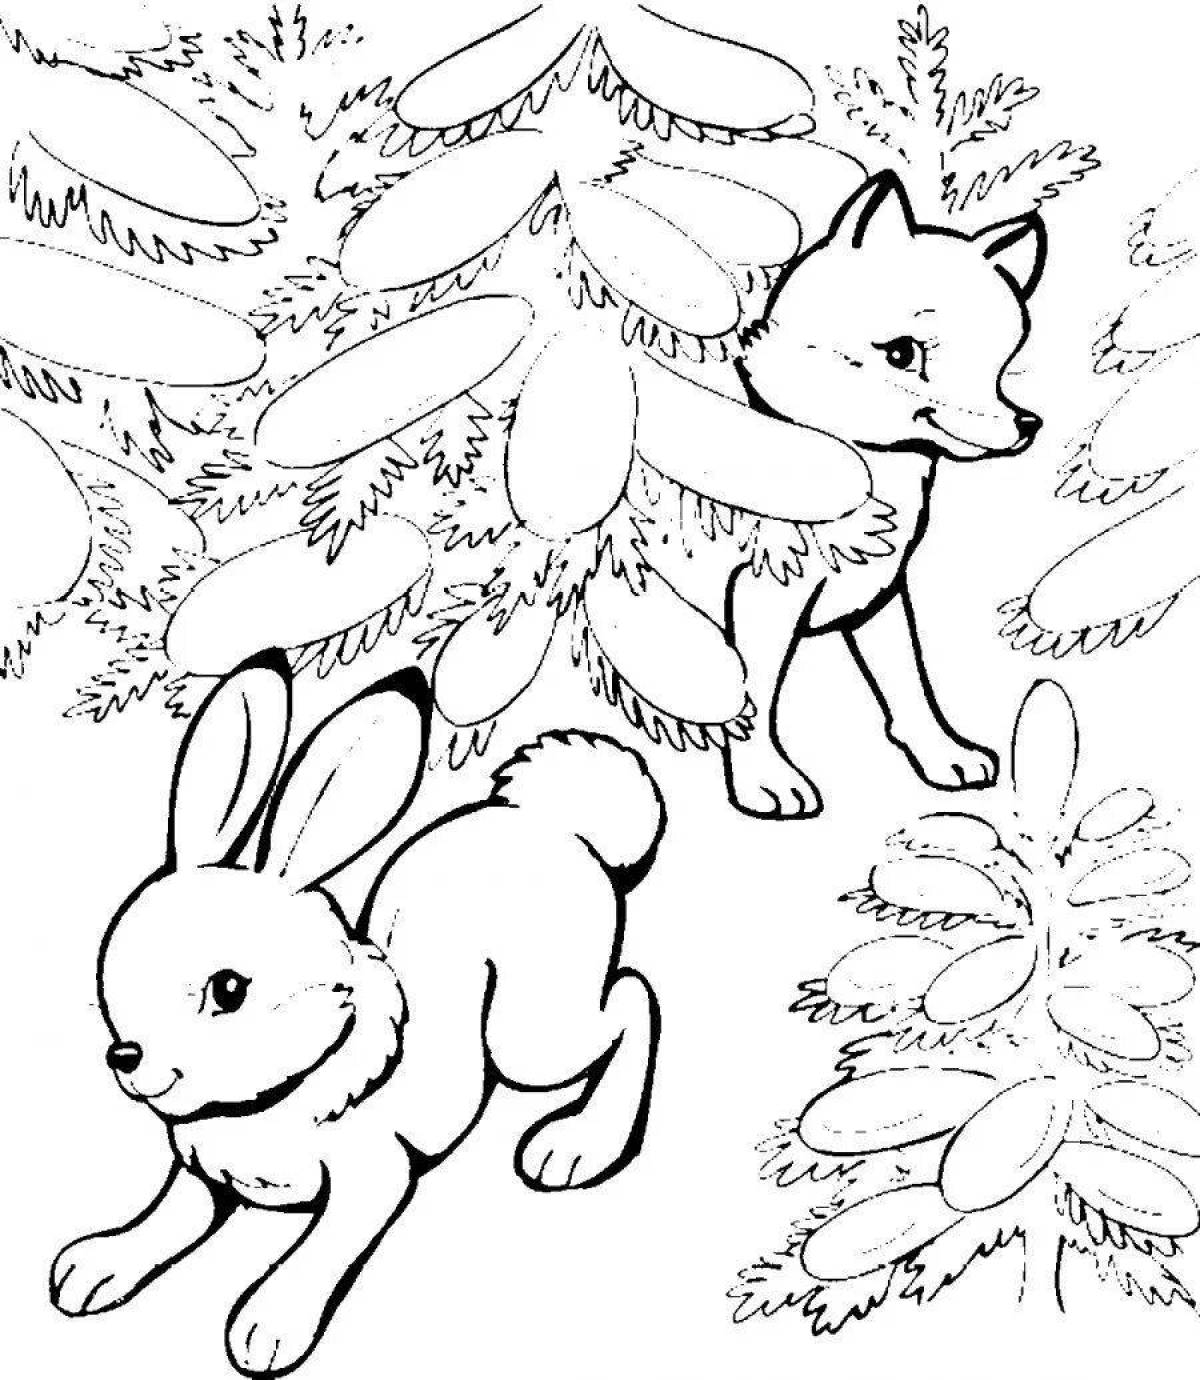 Fun animal coloring pages in winter